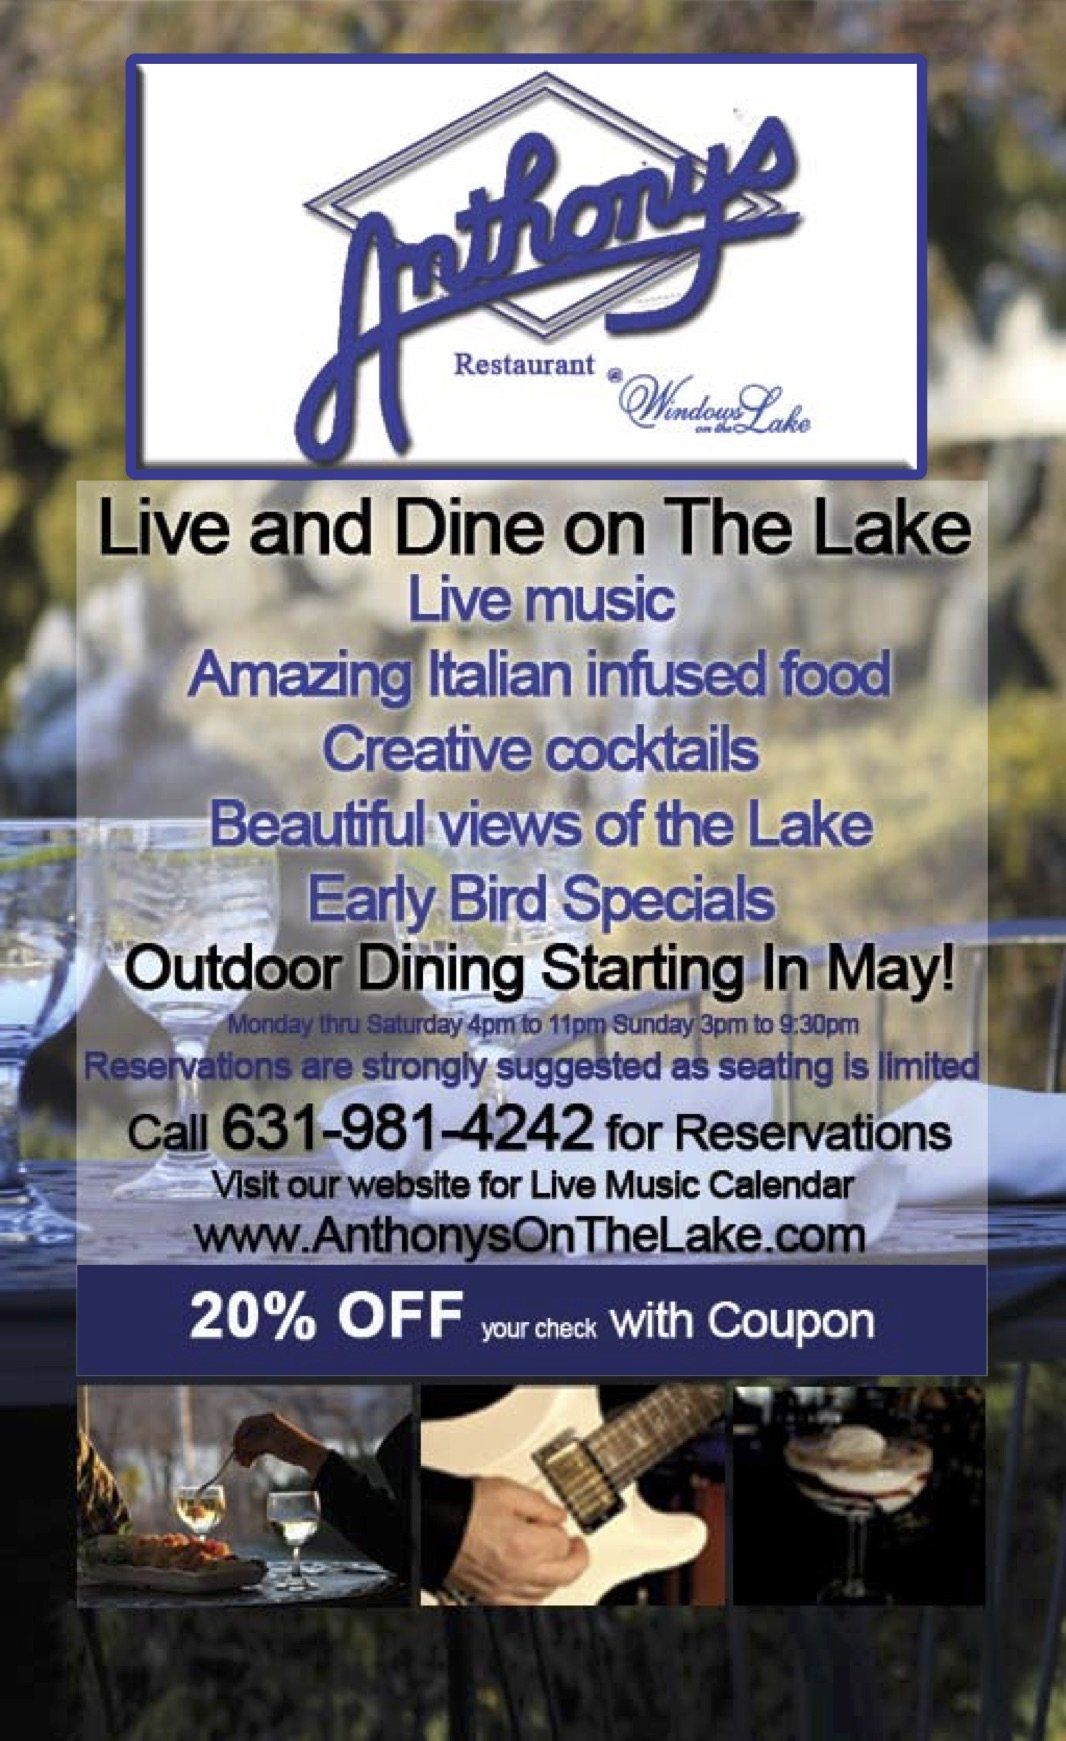 An advertisement for anthony 's live and dine on the lake